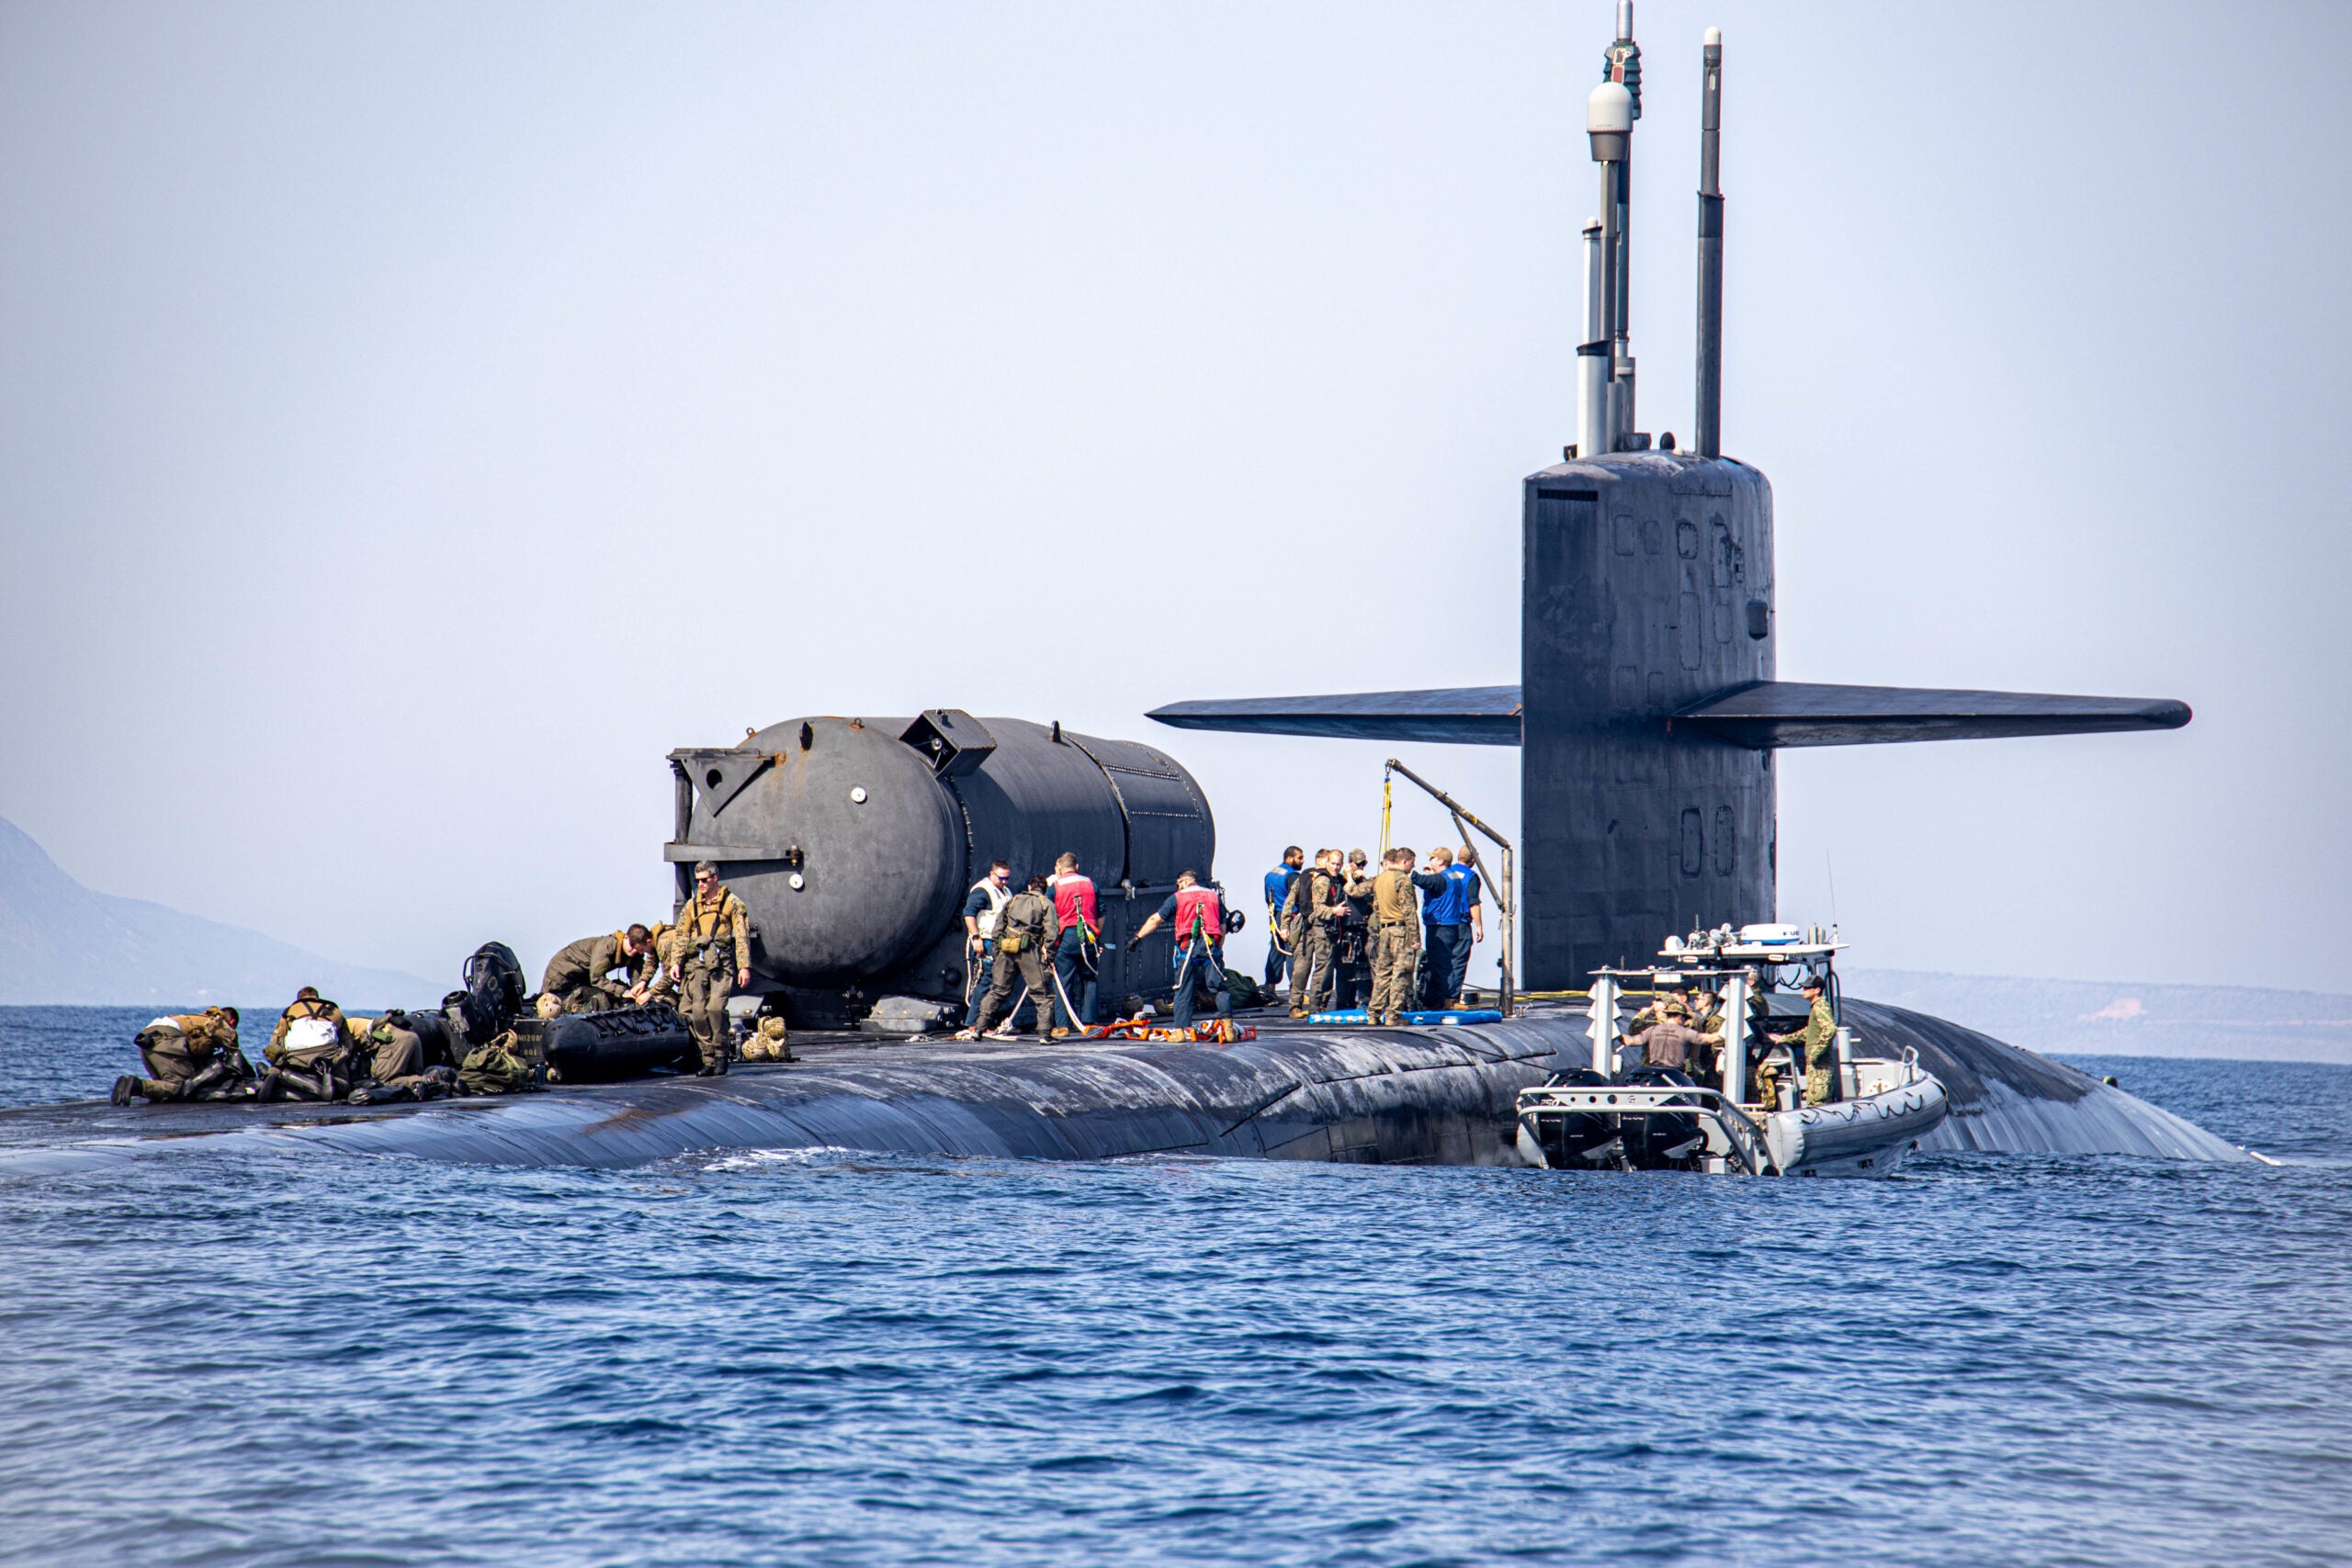 SOUDA BAY (March 27, 2022) – The Ohio-class guided-missile submarine USS Georgia (SSGN 729) near Souda Bay, Greece, during training with U.S. Marines from Task Force 61/2 (TF-61/2), conducting launch and recovery training with their combat rubber raiding craft, March 27, 2022. TF-61/2 will temporarily provide command and control support to the commander of U.S. Sixth Fleet, to synchronize Navy and Marine Corps units and capabilities already in theater, in support of regional Allies and Partners and U.S. national security interests. (U.S. Marine Corps photo by Sgt Dylan Chagnon/Released)